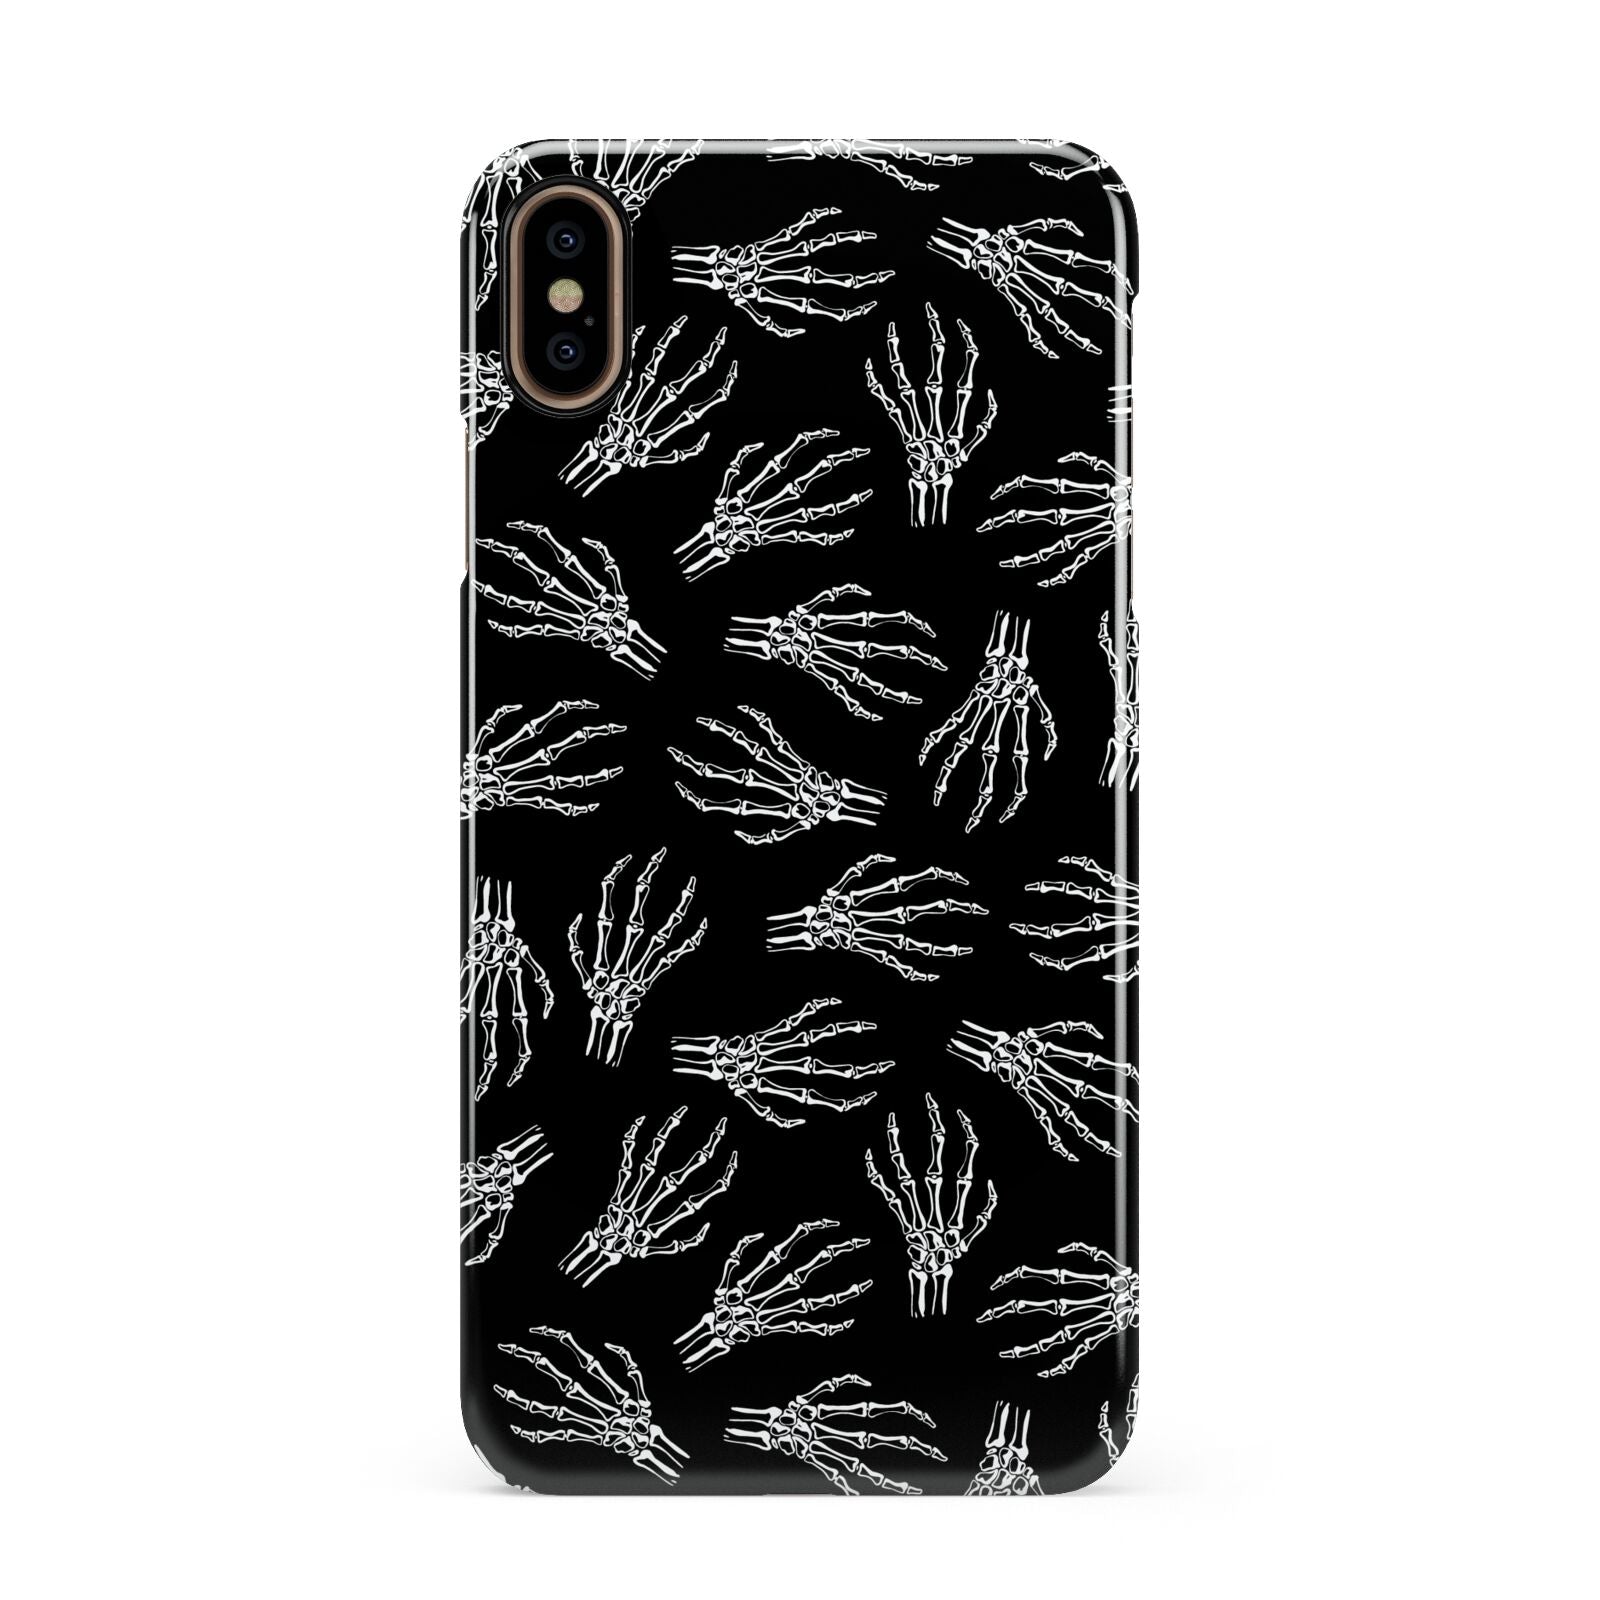 Skeleton Hands Apple iPhone Xs Max 3D Snap Case